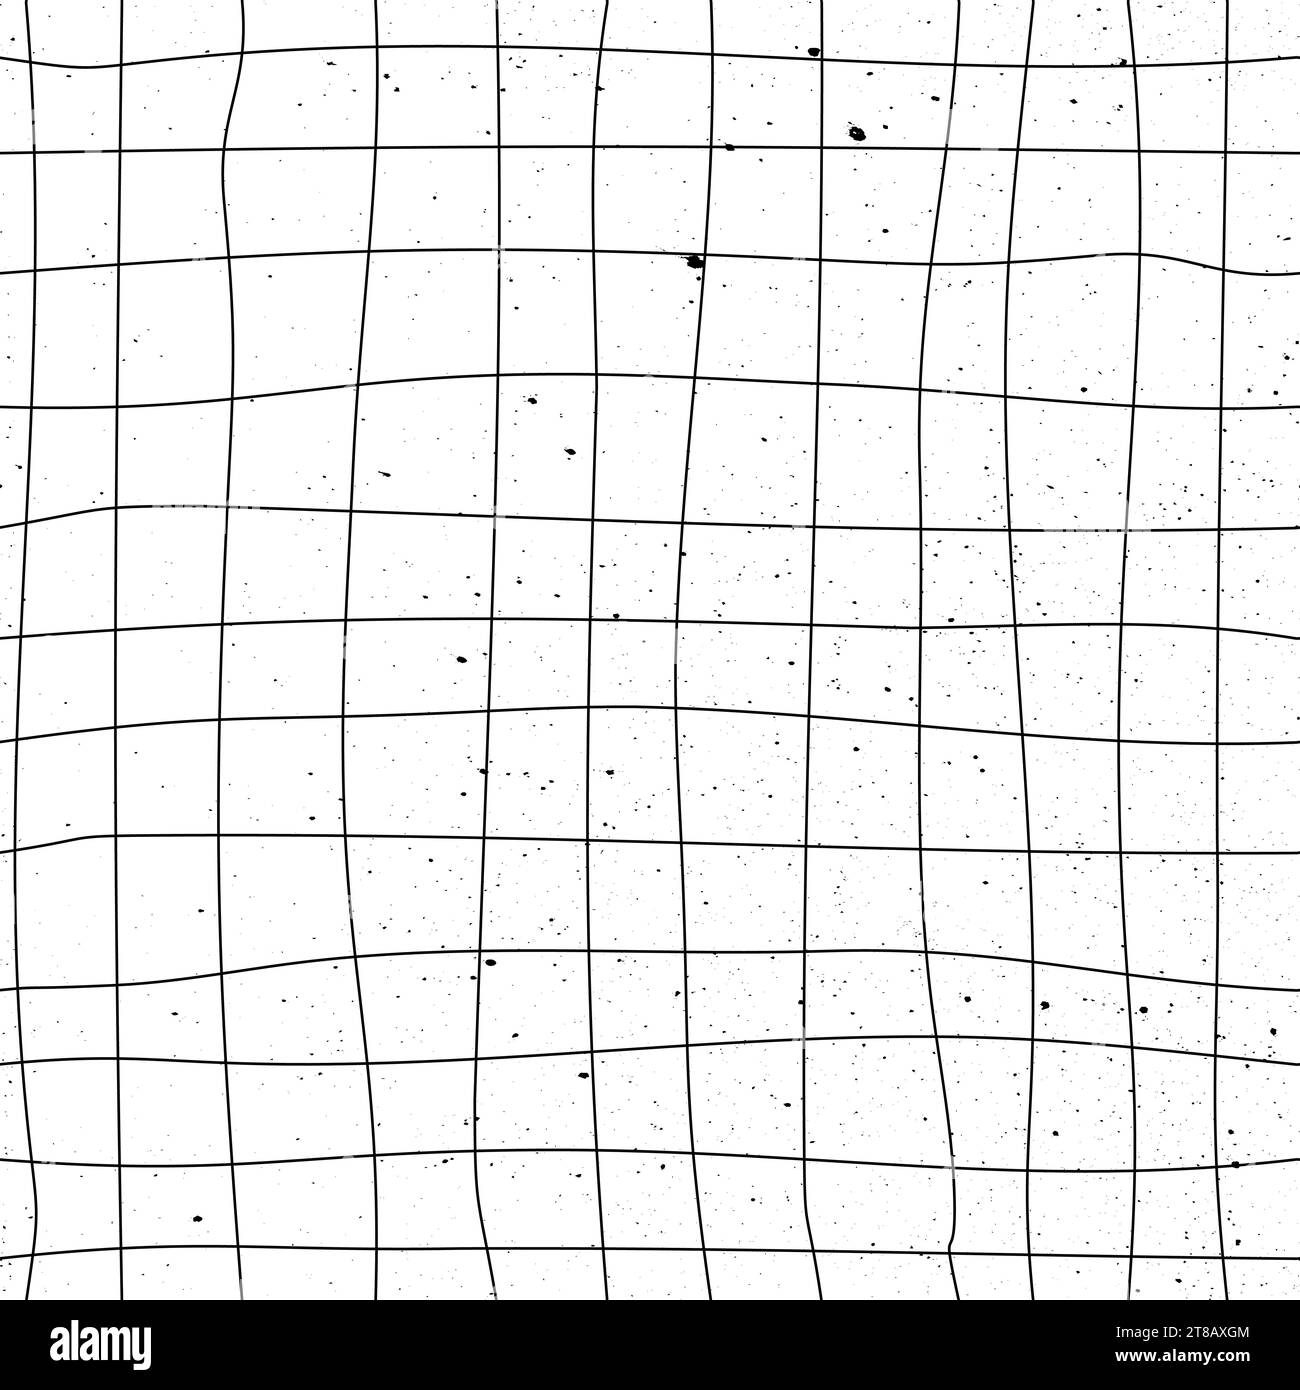 Grunge Black Grid Grunge seamless pattern with hand drawn lines. Ornament for printing on fabric, cover and packaging. Simple black and white vector o Stock Vector